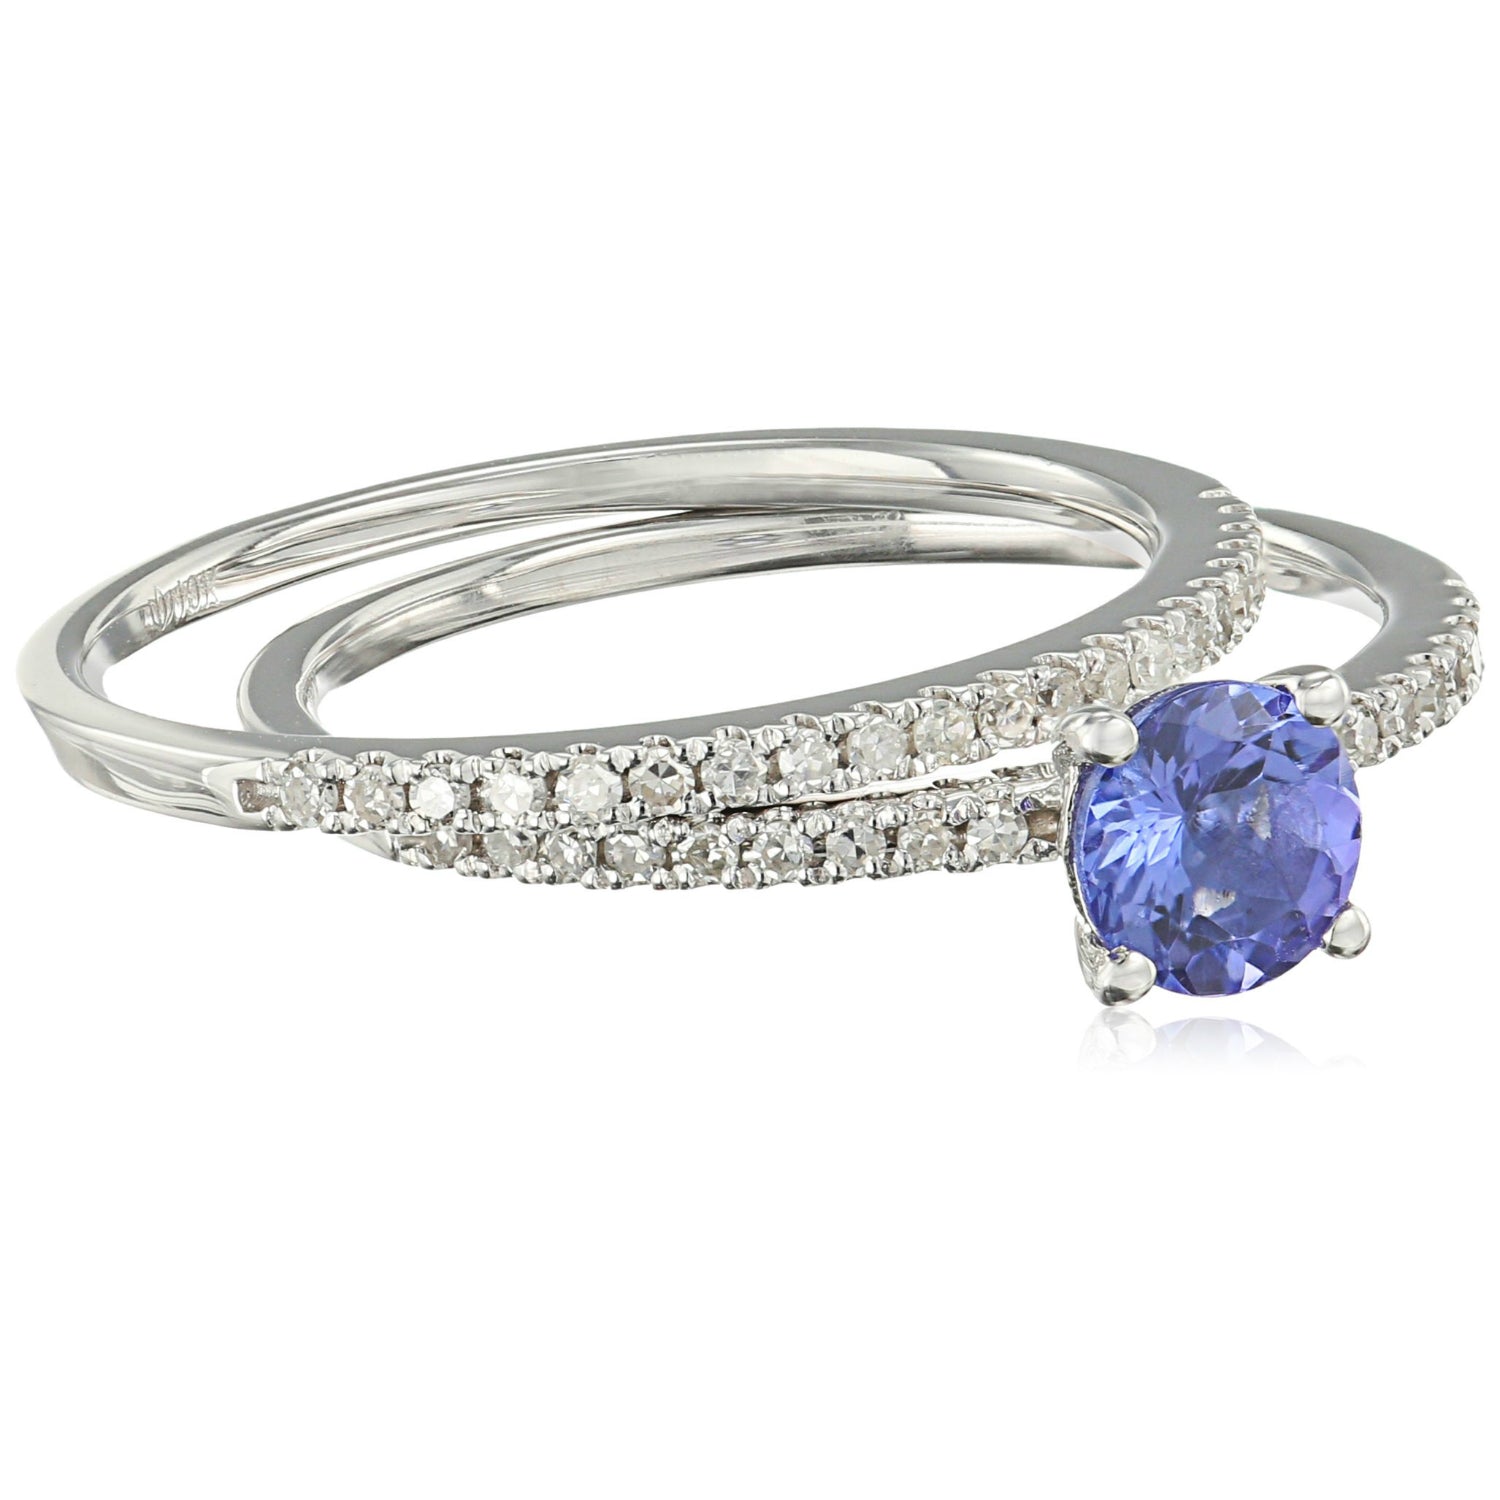 10k White Gold AAA Tanzanite And Diamond Stackable Ring (1/5cttw, H-I Color, I1-I2 Clarity), - pinctore